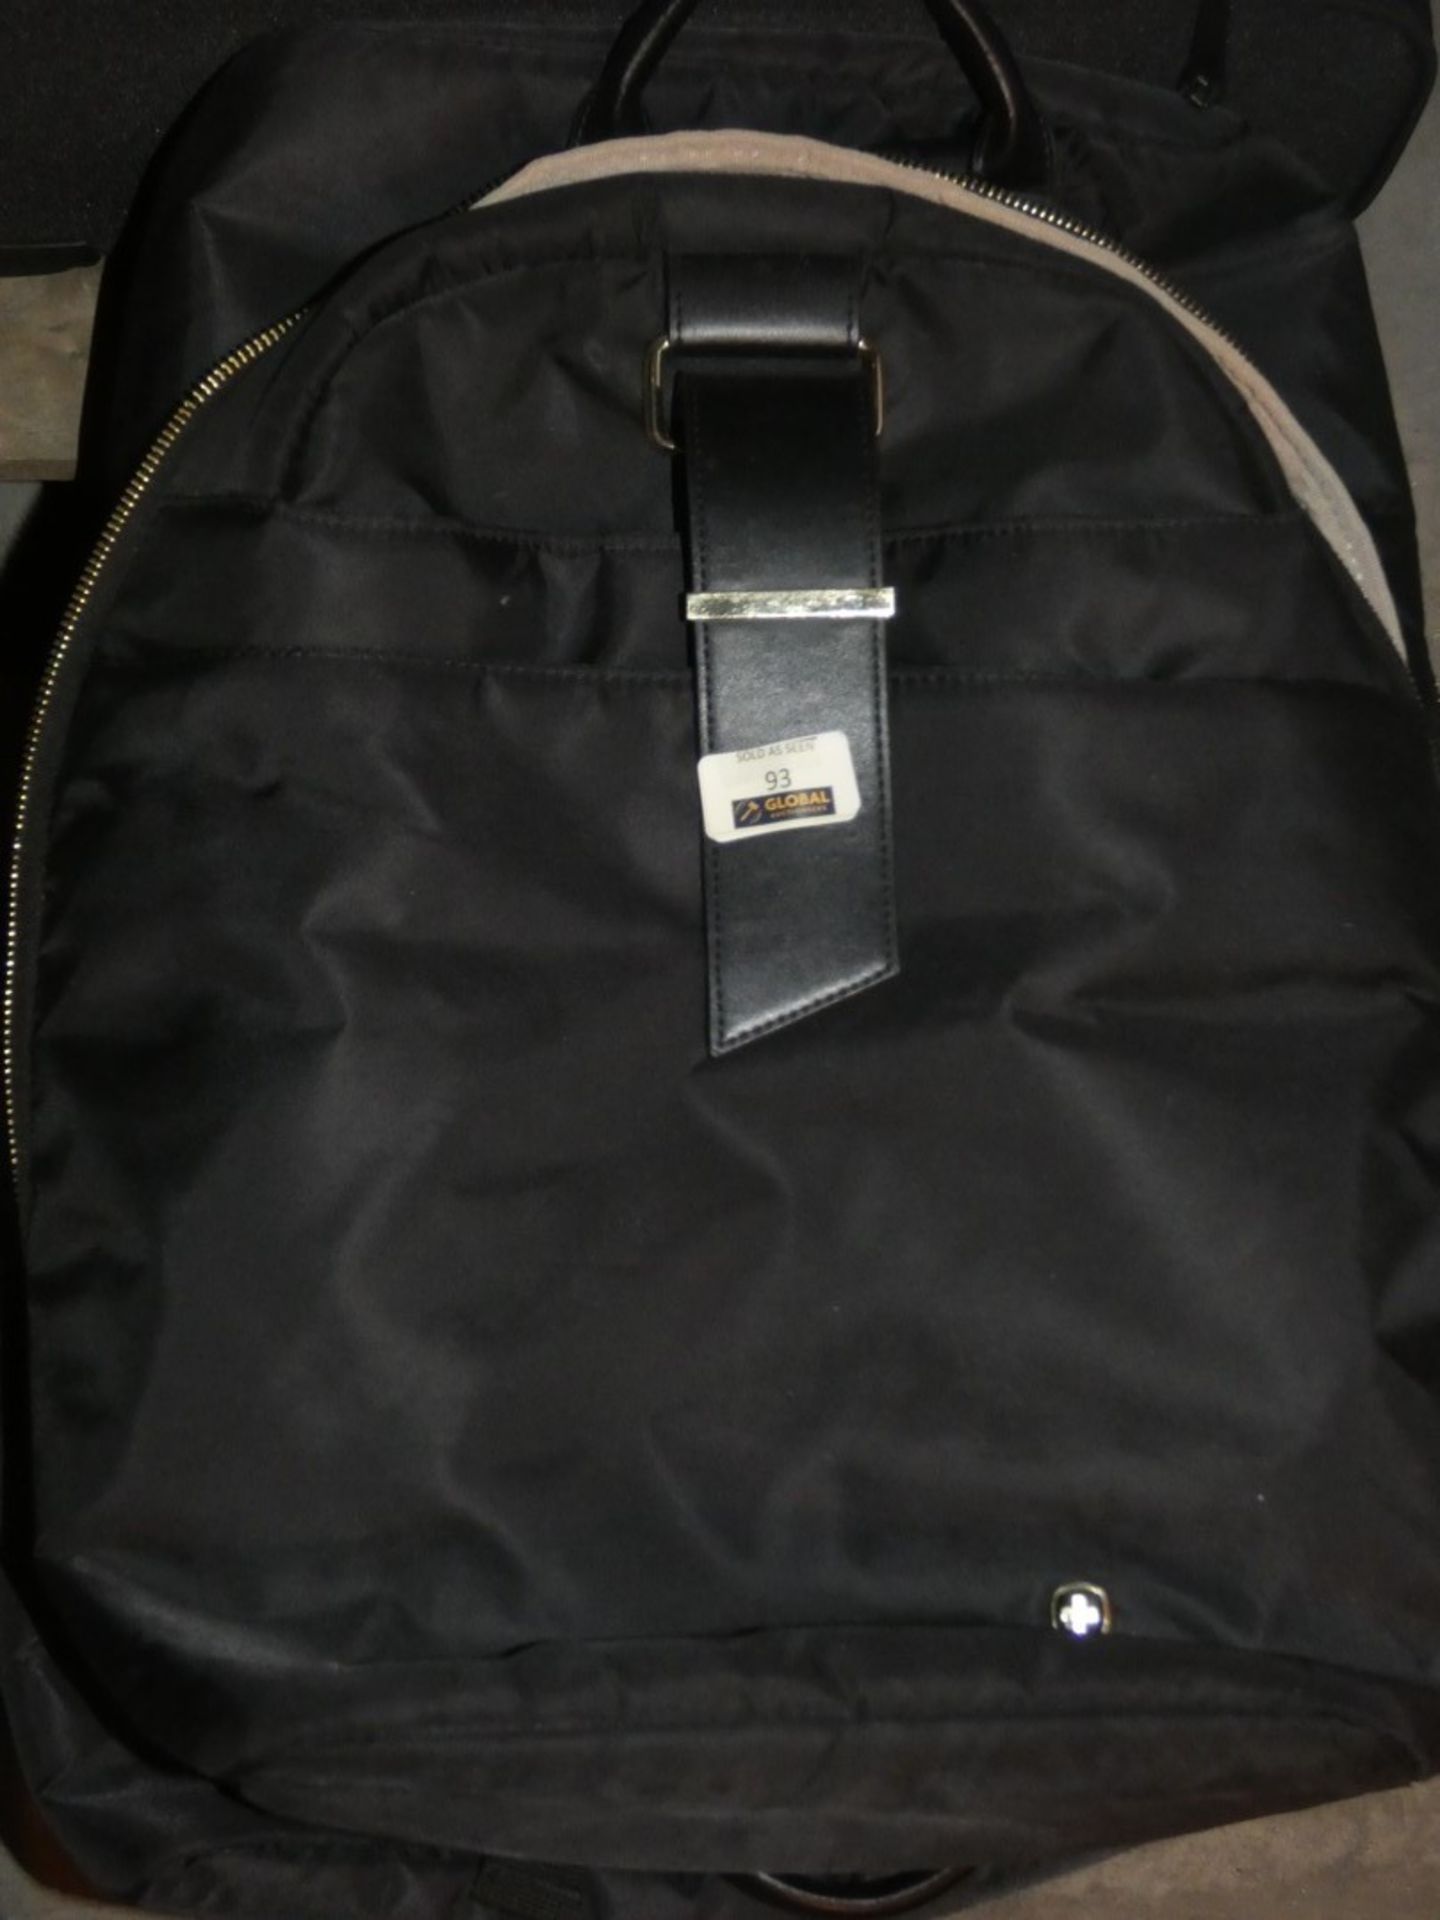 Ladies Wenga Rucksack Style Laptop Protective Cases (Viewings And Appraisals Are Highly